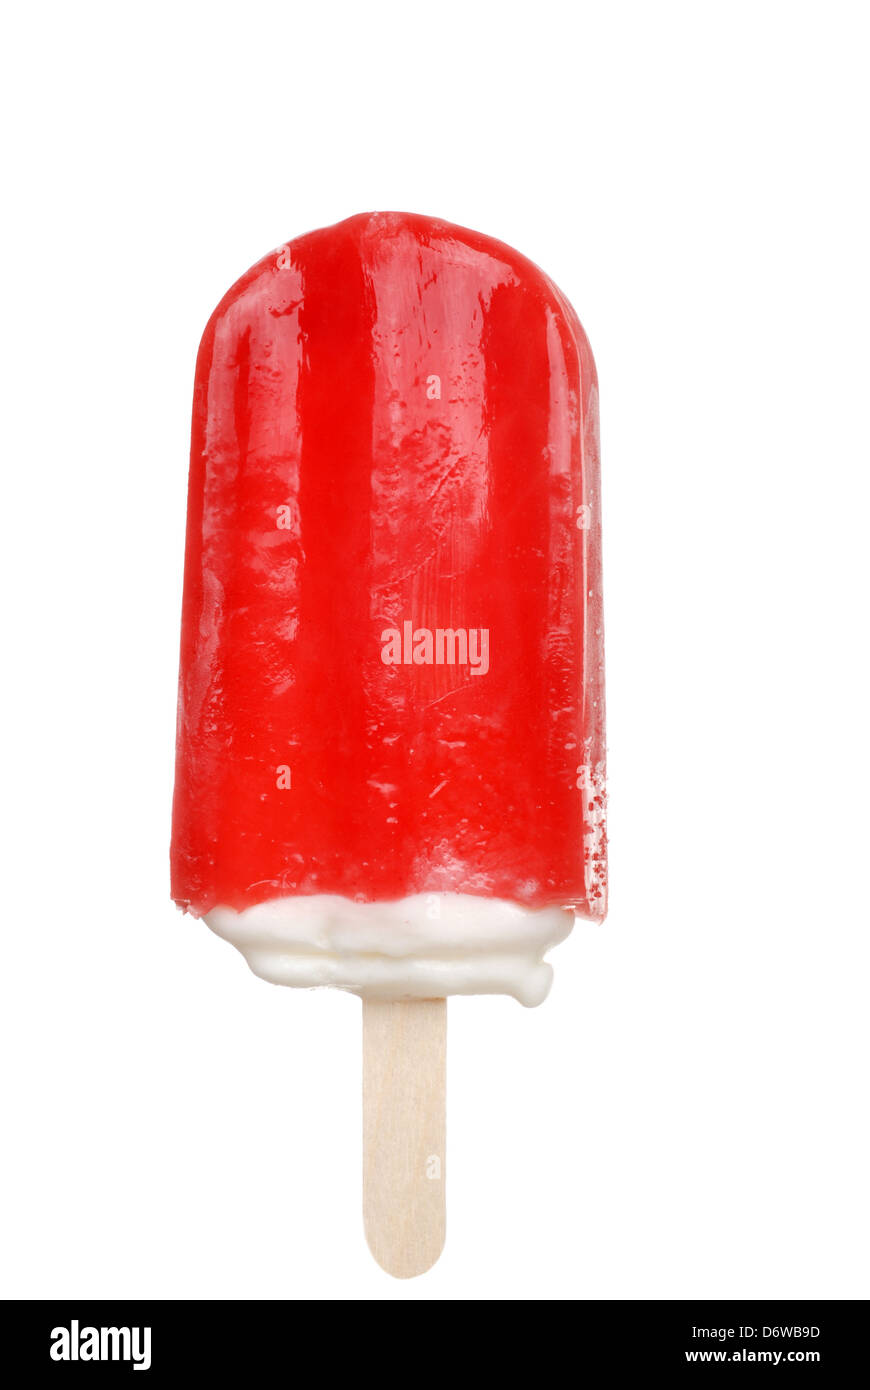 strawberry creamsicle popsicle Stock Photo